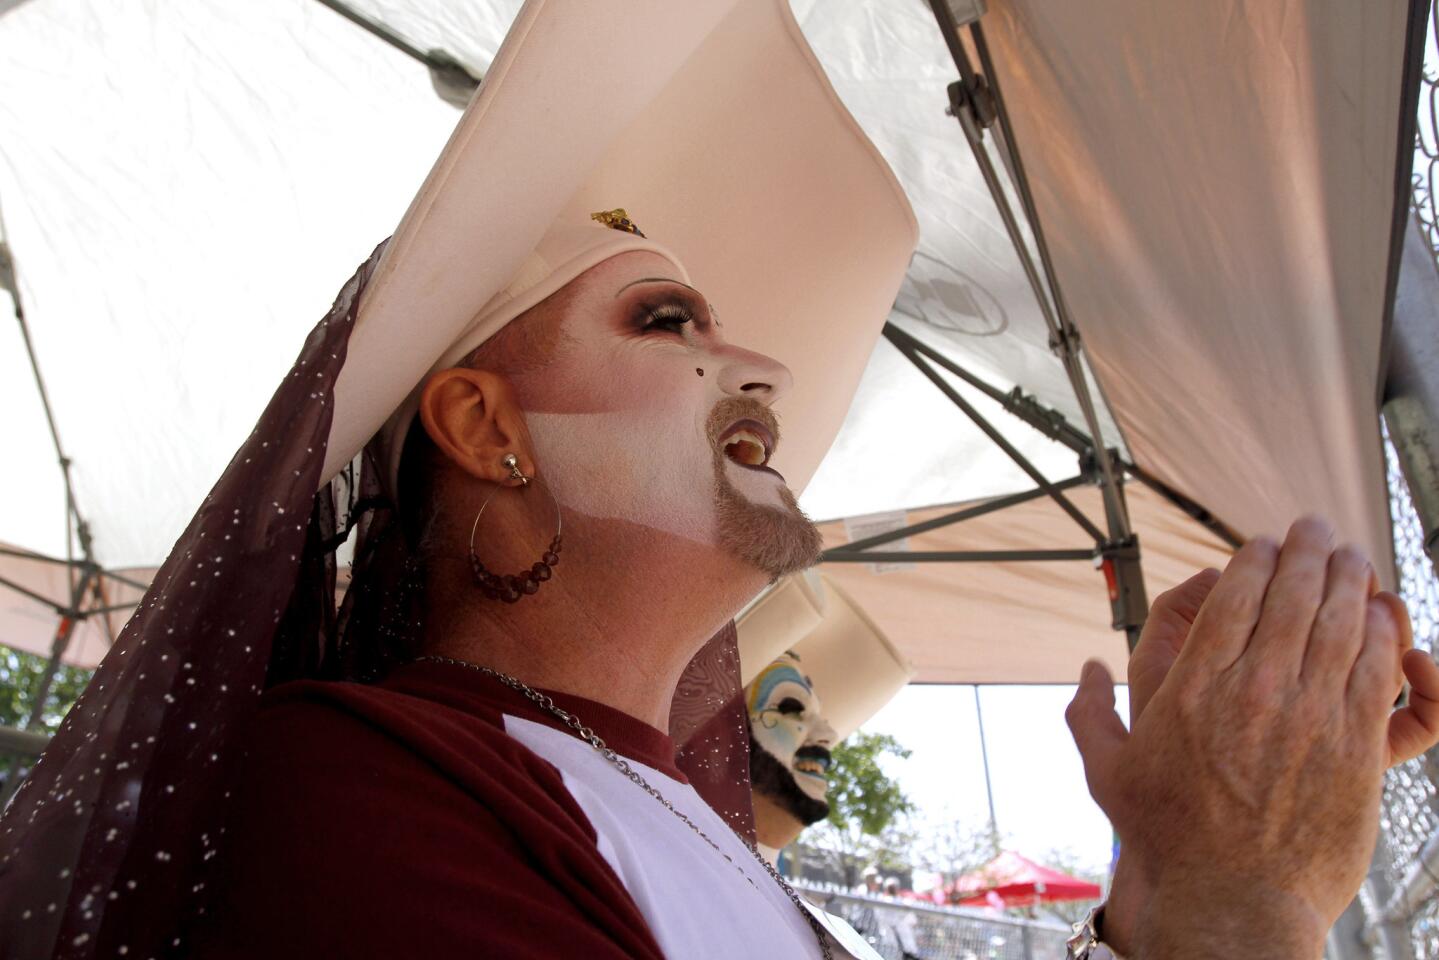 Photo Gallery: The 3rd annual Drag Queen Softball World Series in Glendale